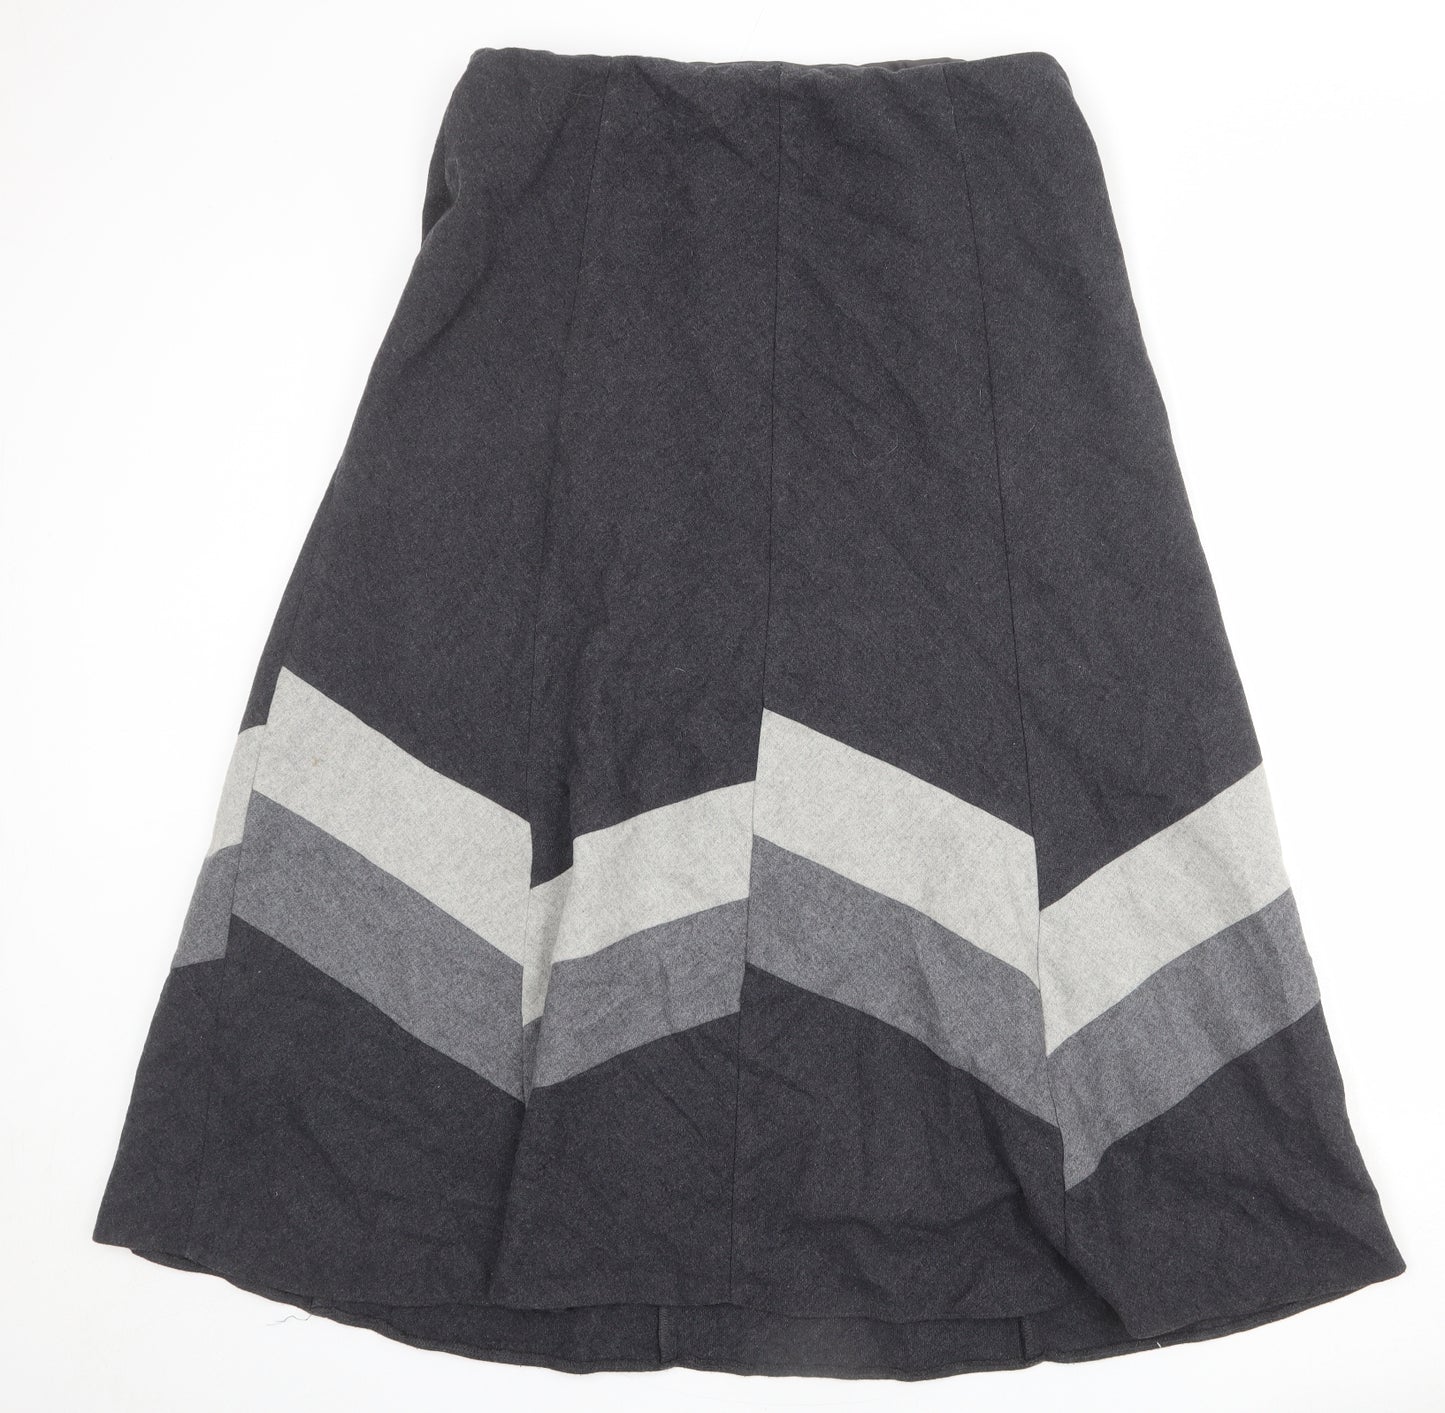 Marks and Spencer Womens Grey Striped Wool Swing Skirt Size 16